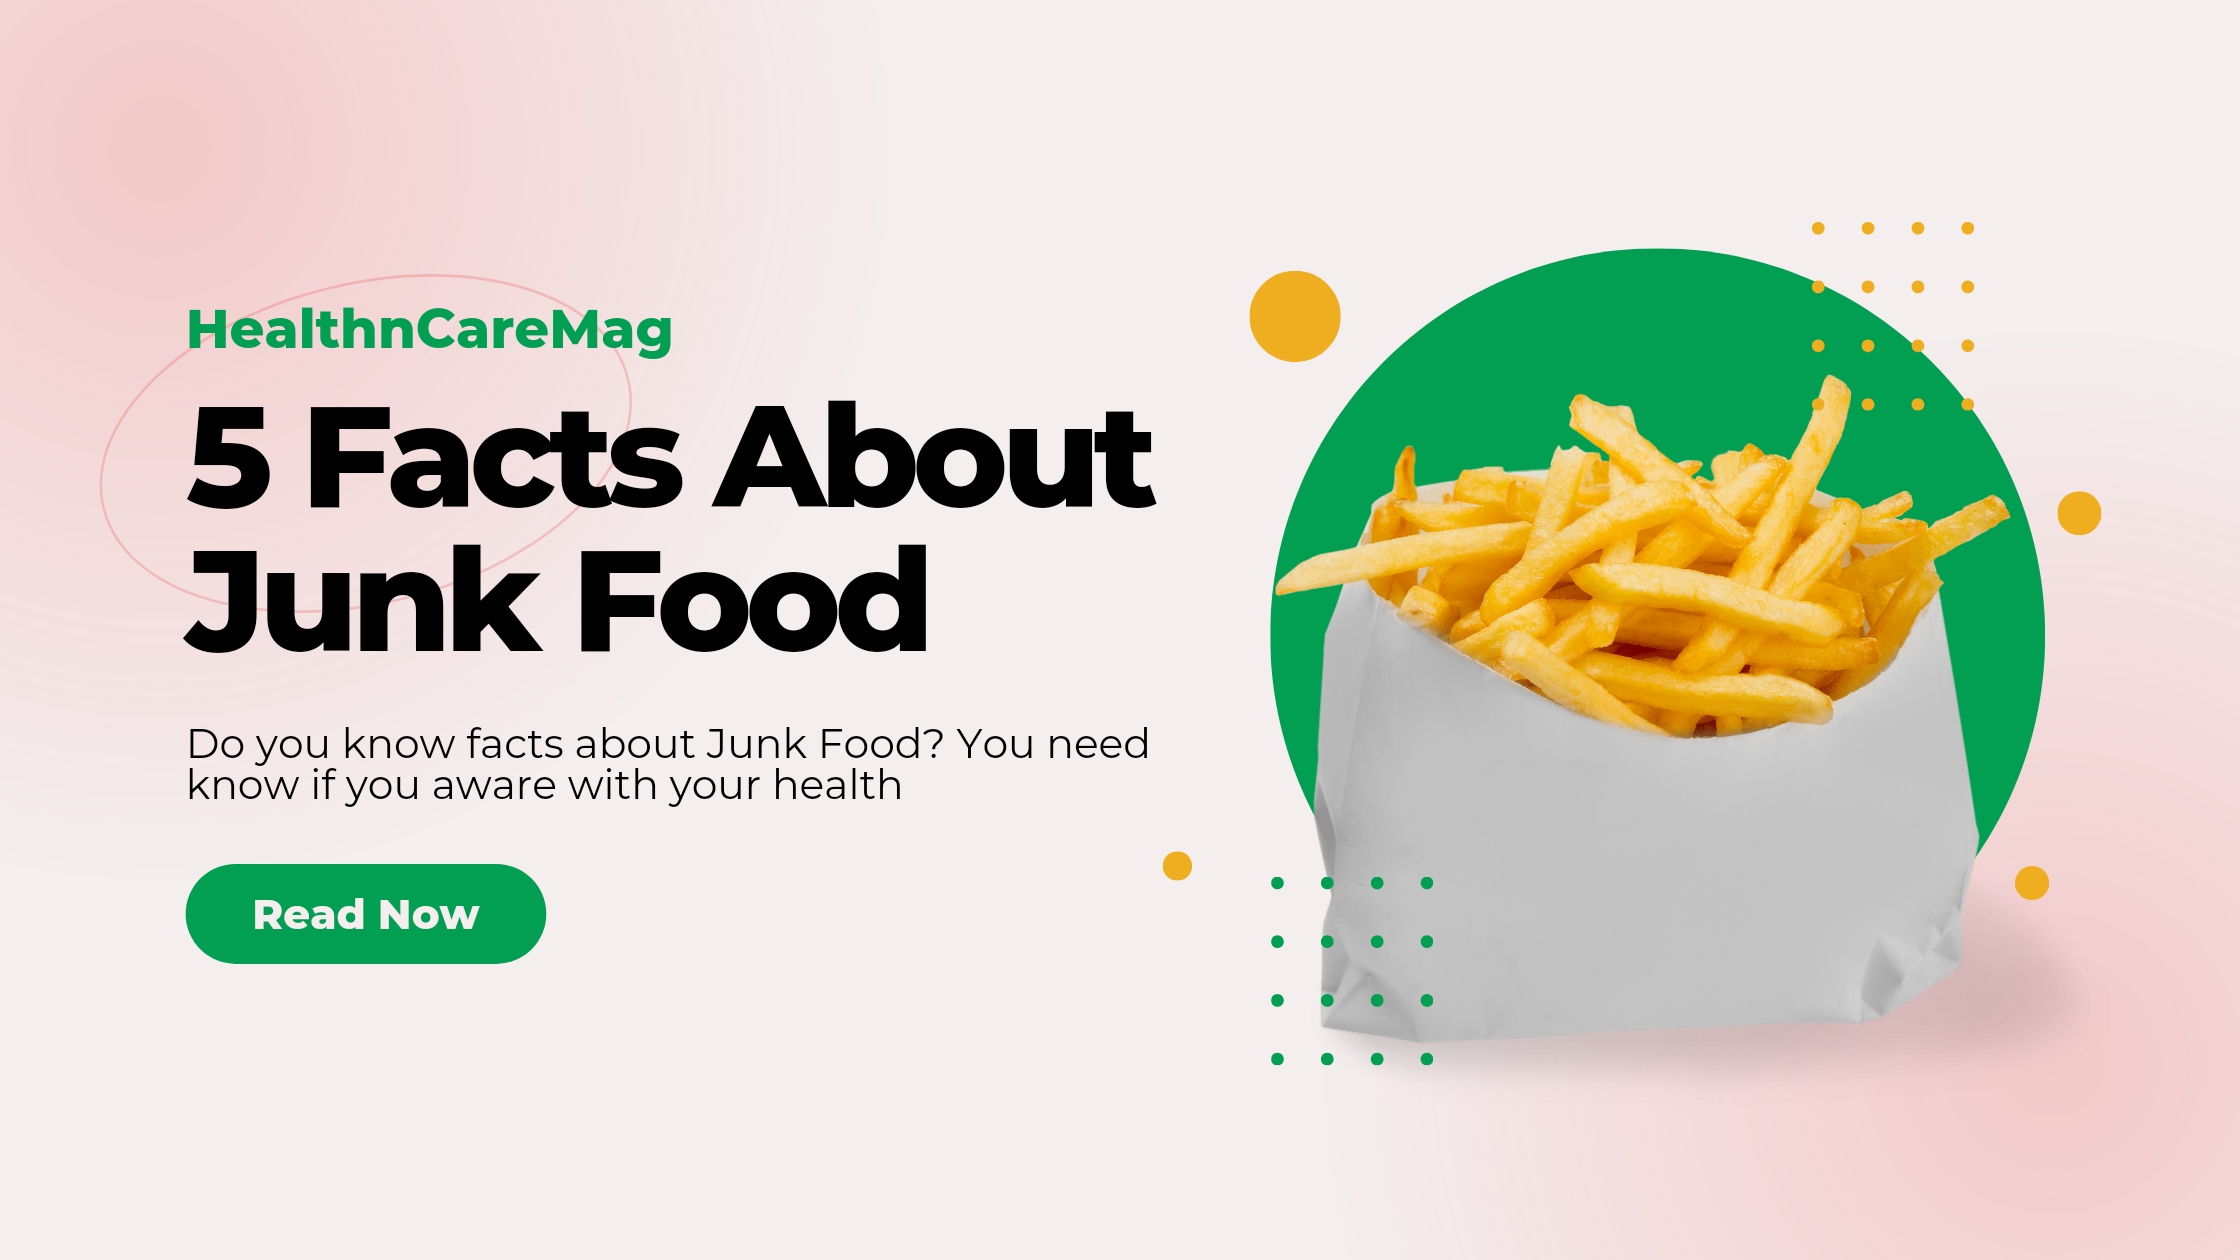 Do You Know the Facts About Junk Food? You Need to Know if You’re Aware of Your Health